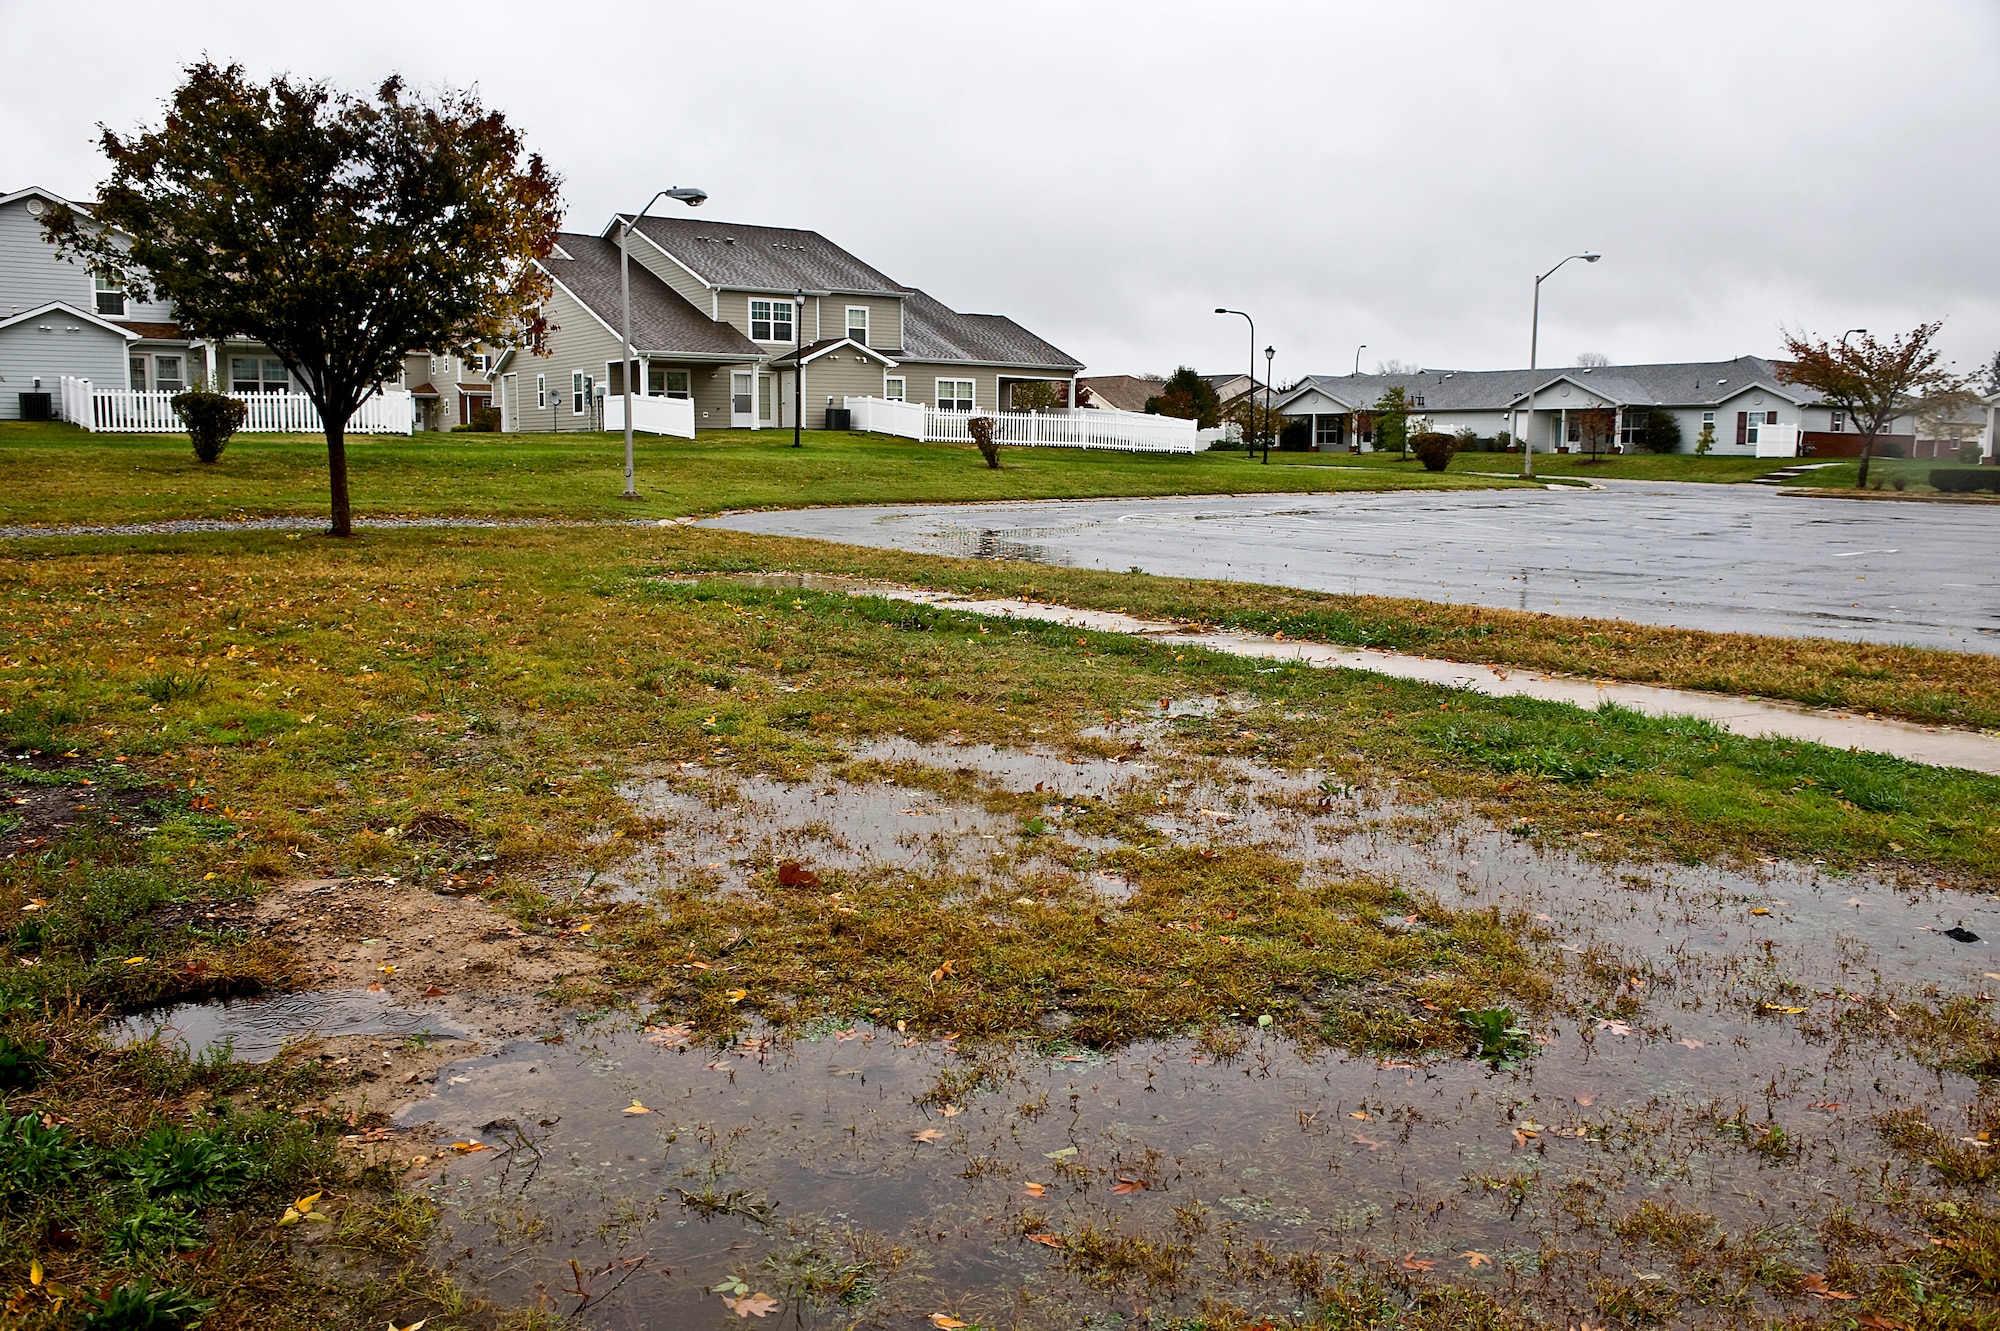 Low lying areas in base housing were saturated with water Oct. 30, 2012, on Dover Air Force Base, Del., as a result of the heavy rainfall from Superstorm Sandy. (U.S. Air Force photo by Master Sgt. Jeanette Spain)